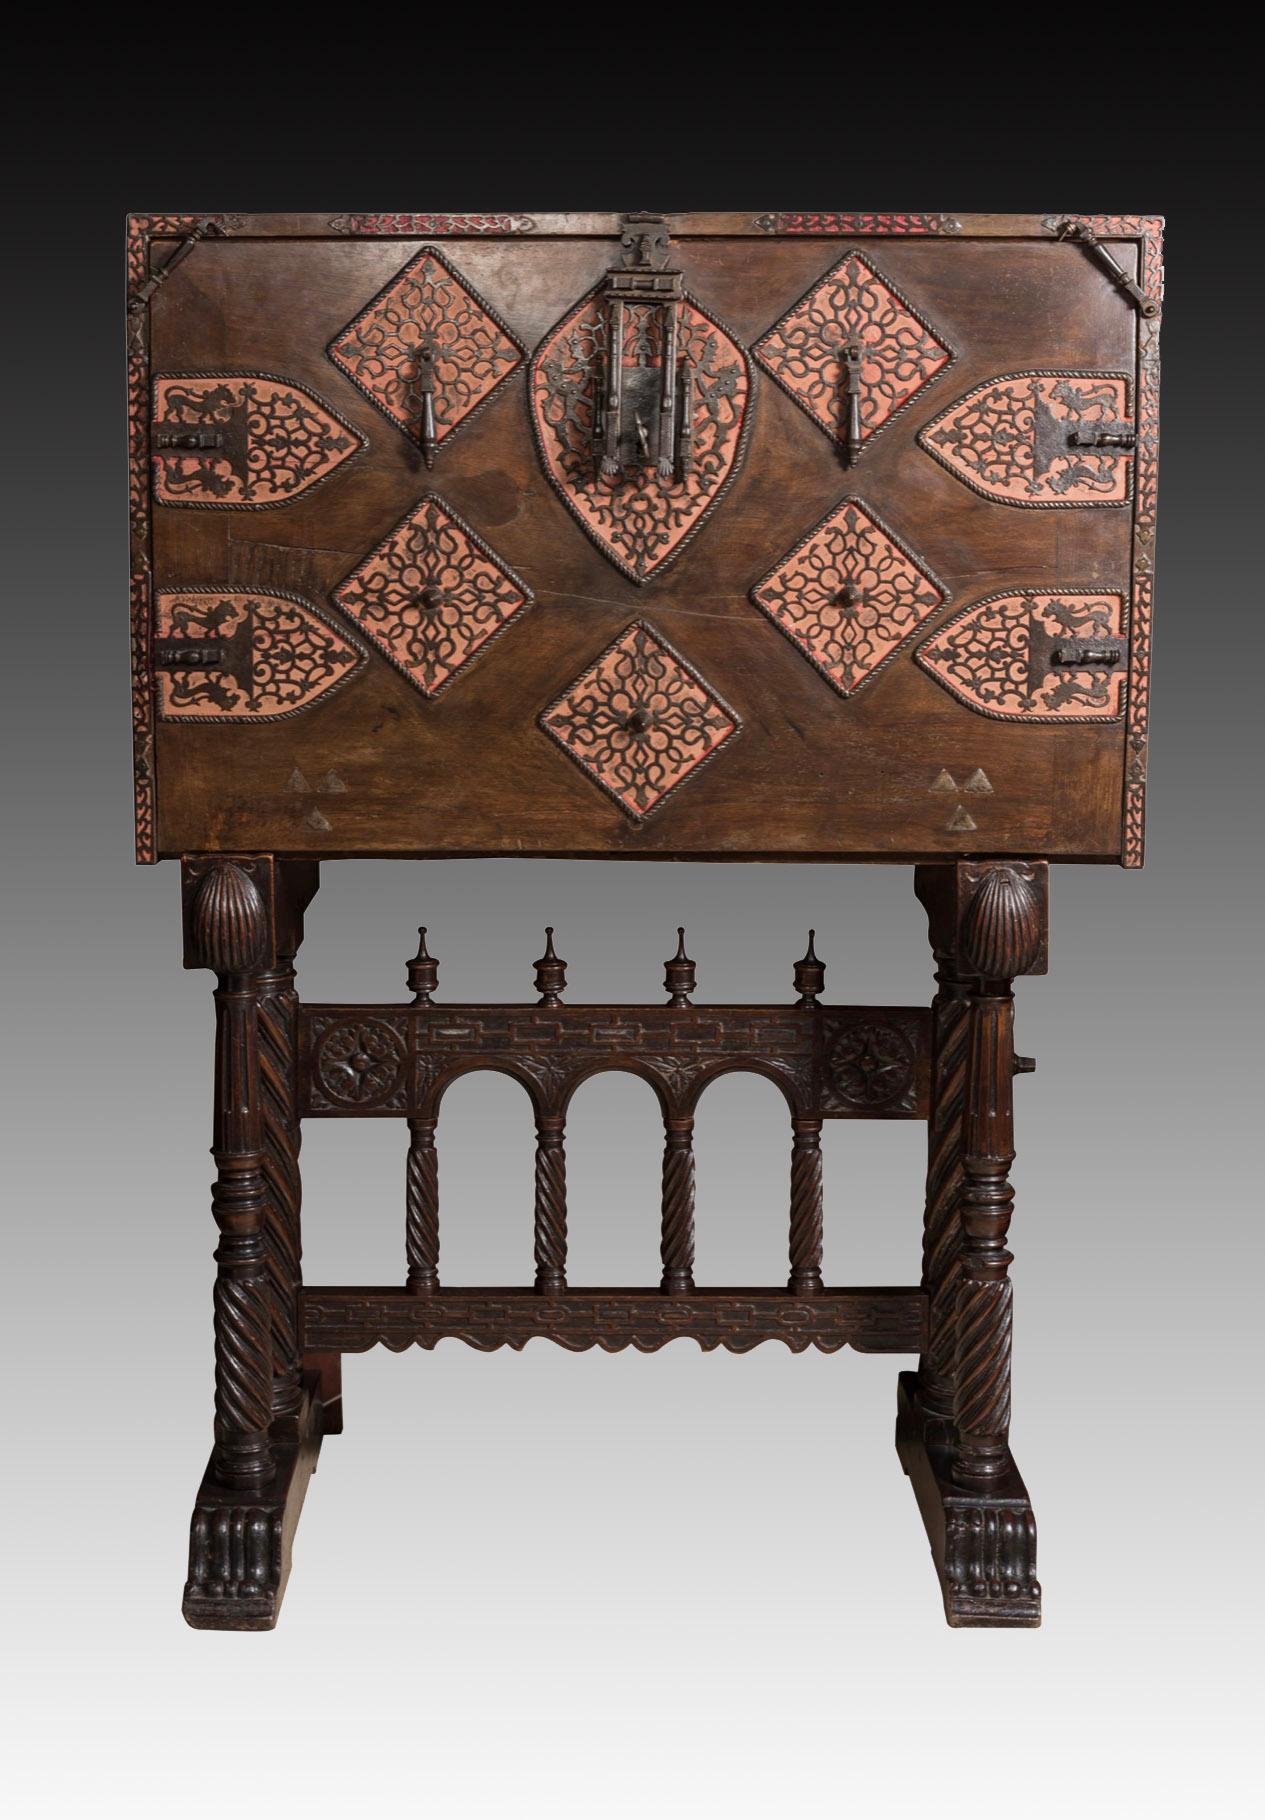 Bargueño; Spain, 17th century. Walnut wood. 
 Period fittings and the foot made in the XIX century. / Herrajes de época, pie siglo XIX.
 Bargueño with small columns, with a folding front cover, decorated on the outside with cut and openwork metal